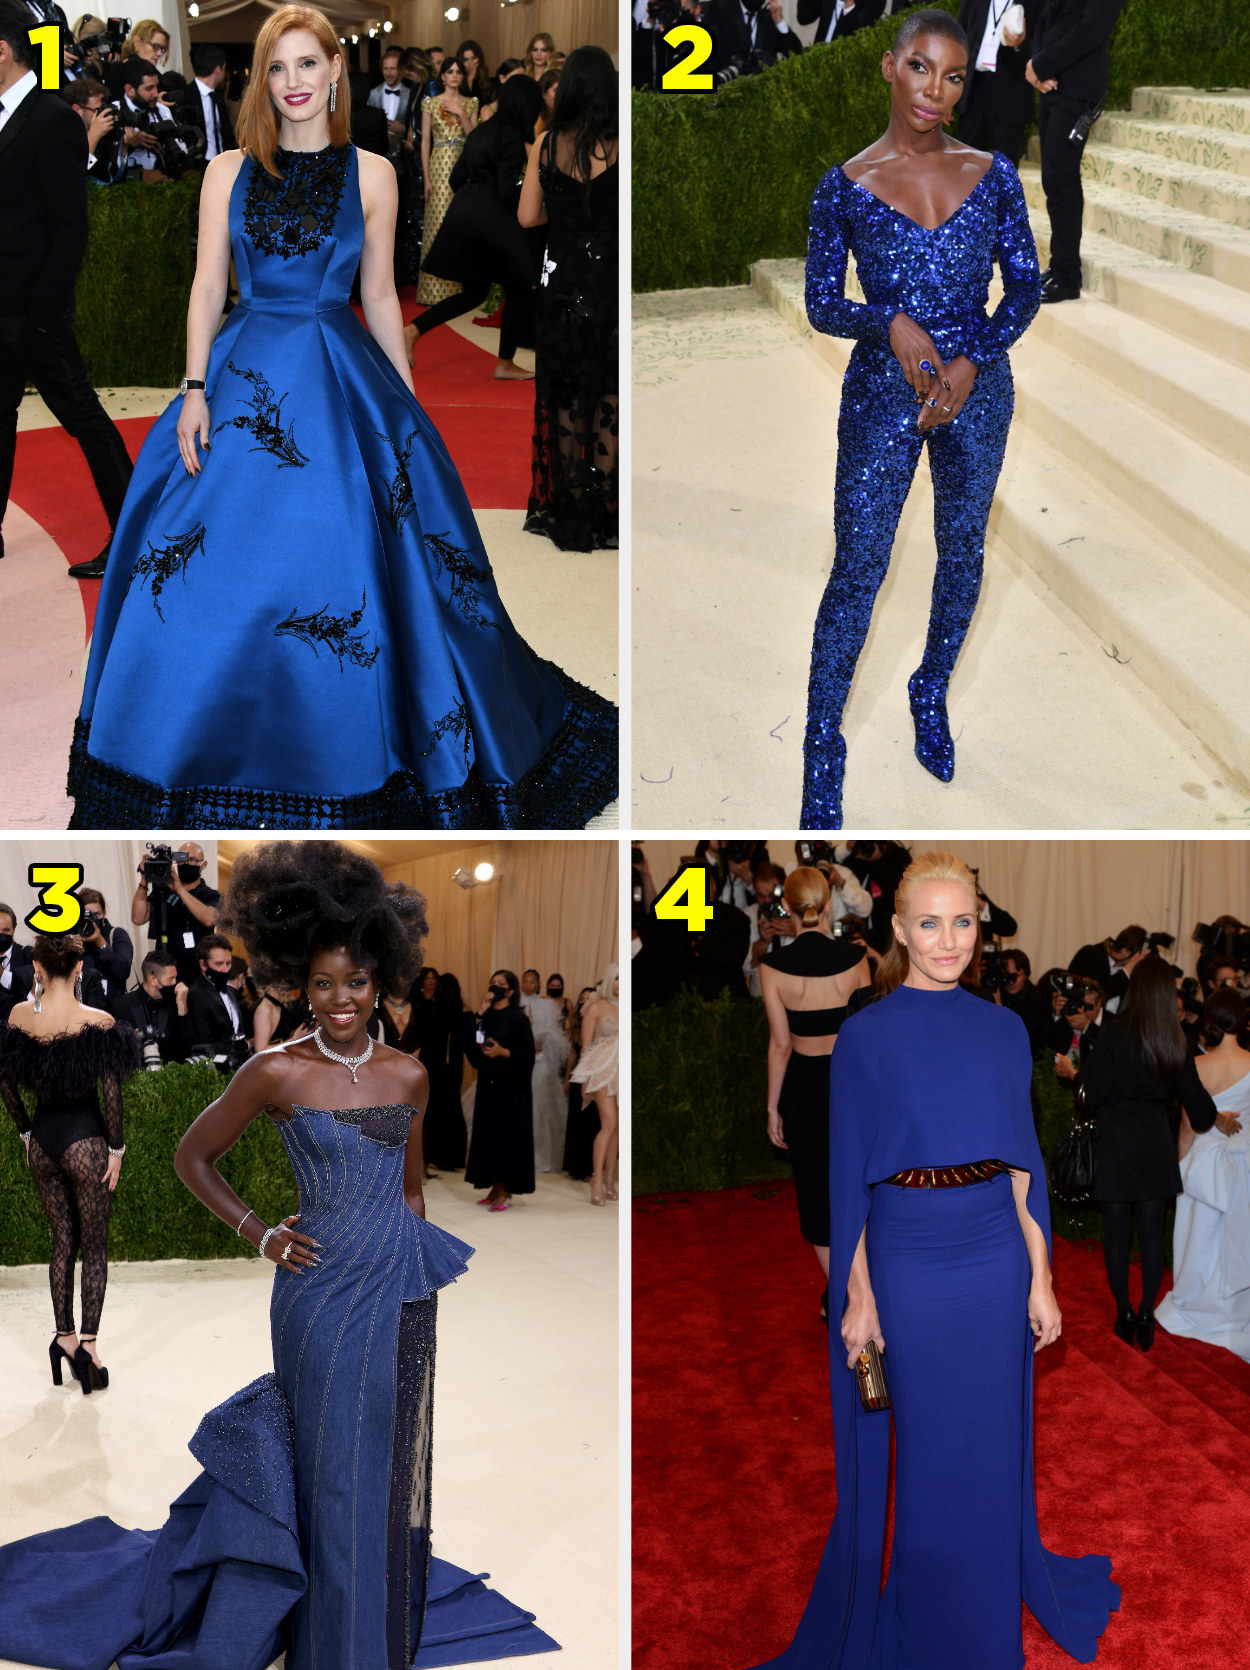 1. A high neck ballgown with flower appliques. 2. A formfitting glitter jumpsuit. 3. A denim strapless gown with an asymmetrical skirt and train. 4. A long gown belted at the waist with a matching overlay on top.